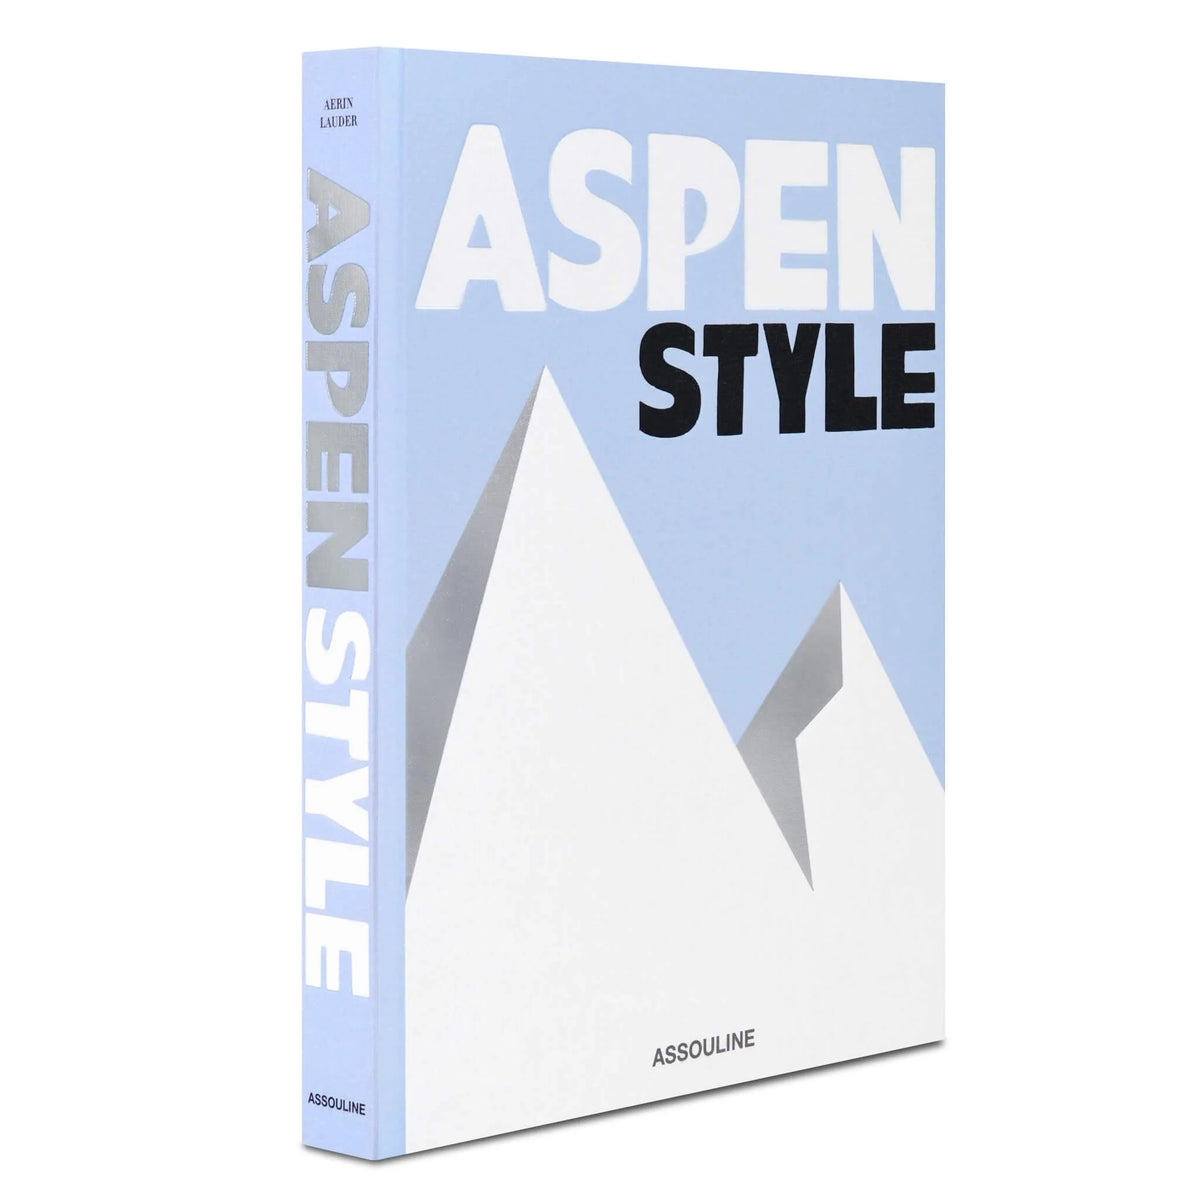 Aspen Style hardcover book with illustrations